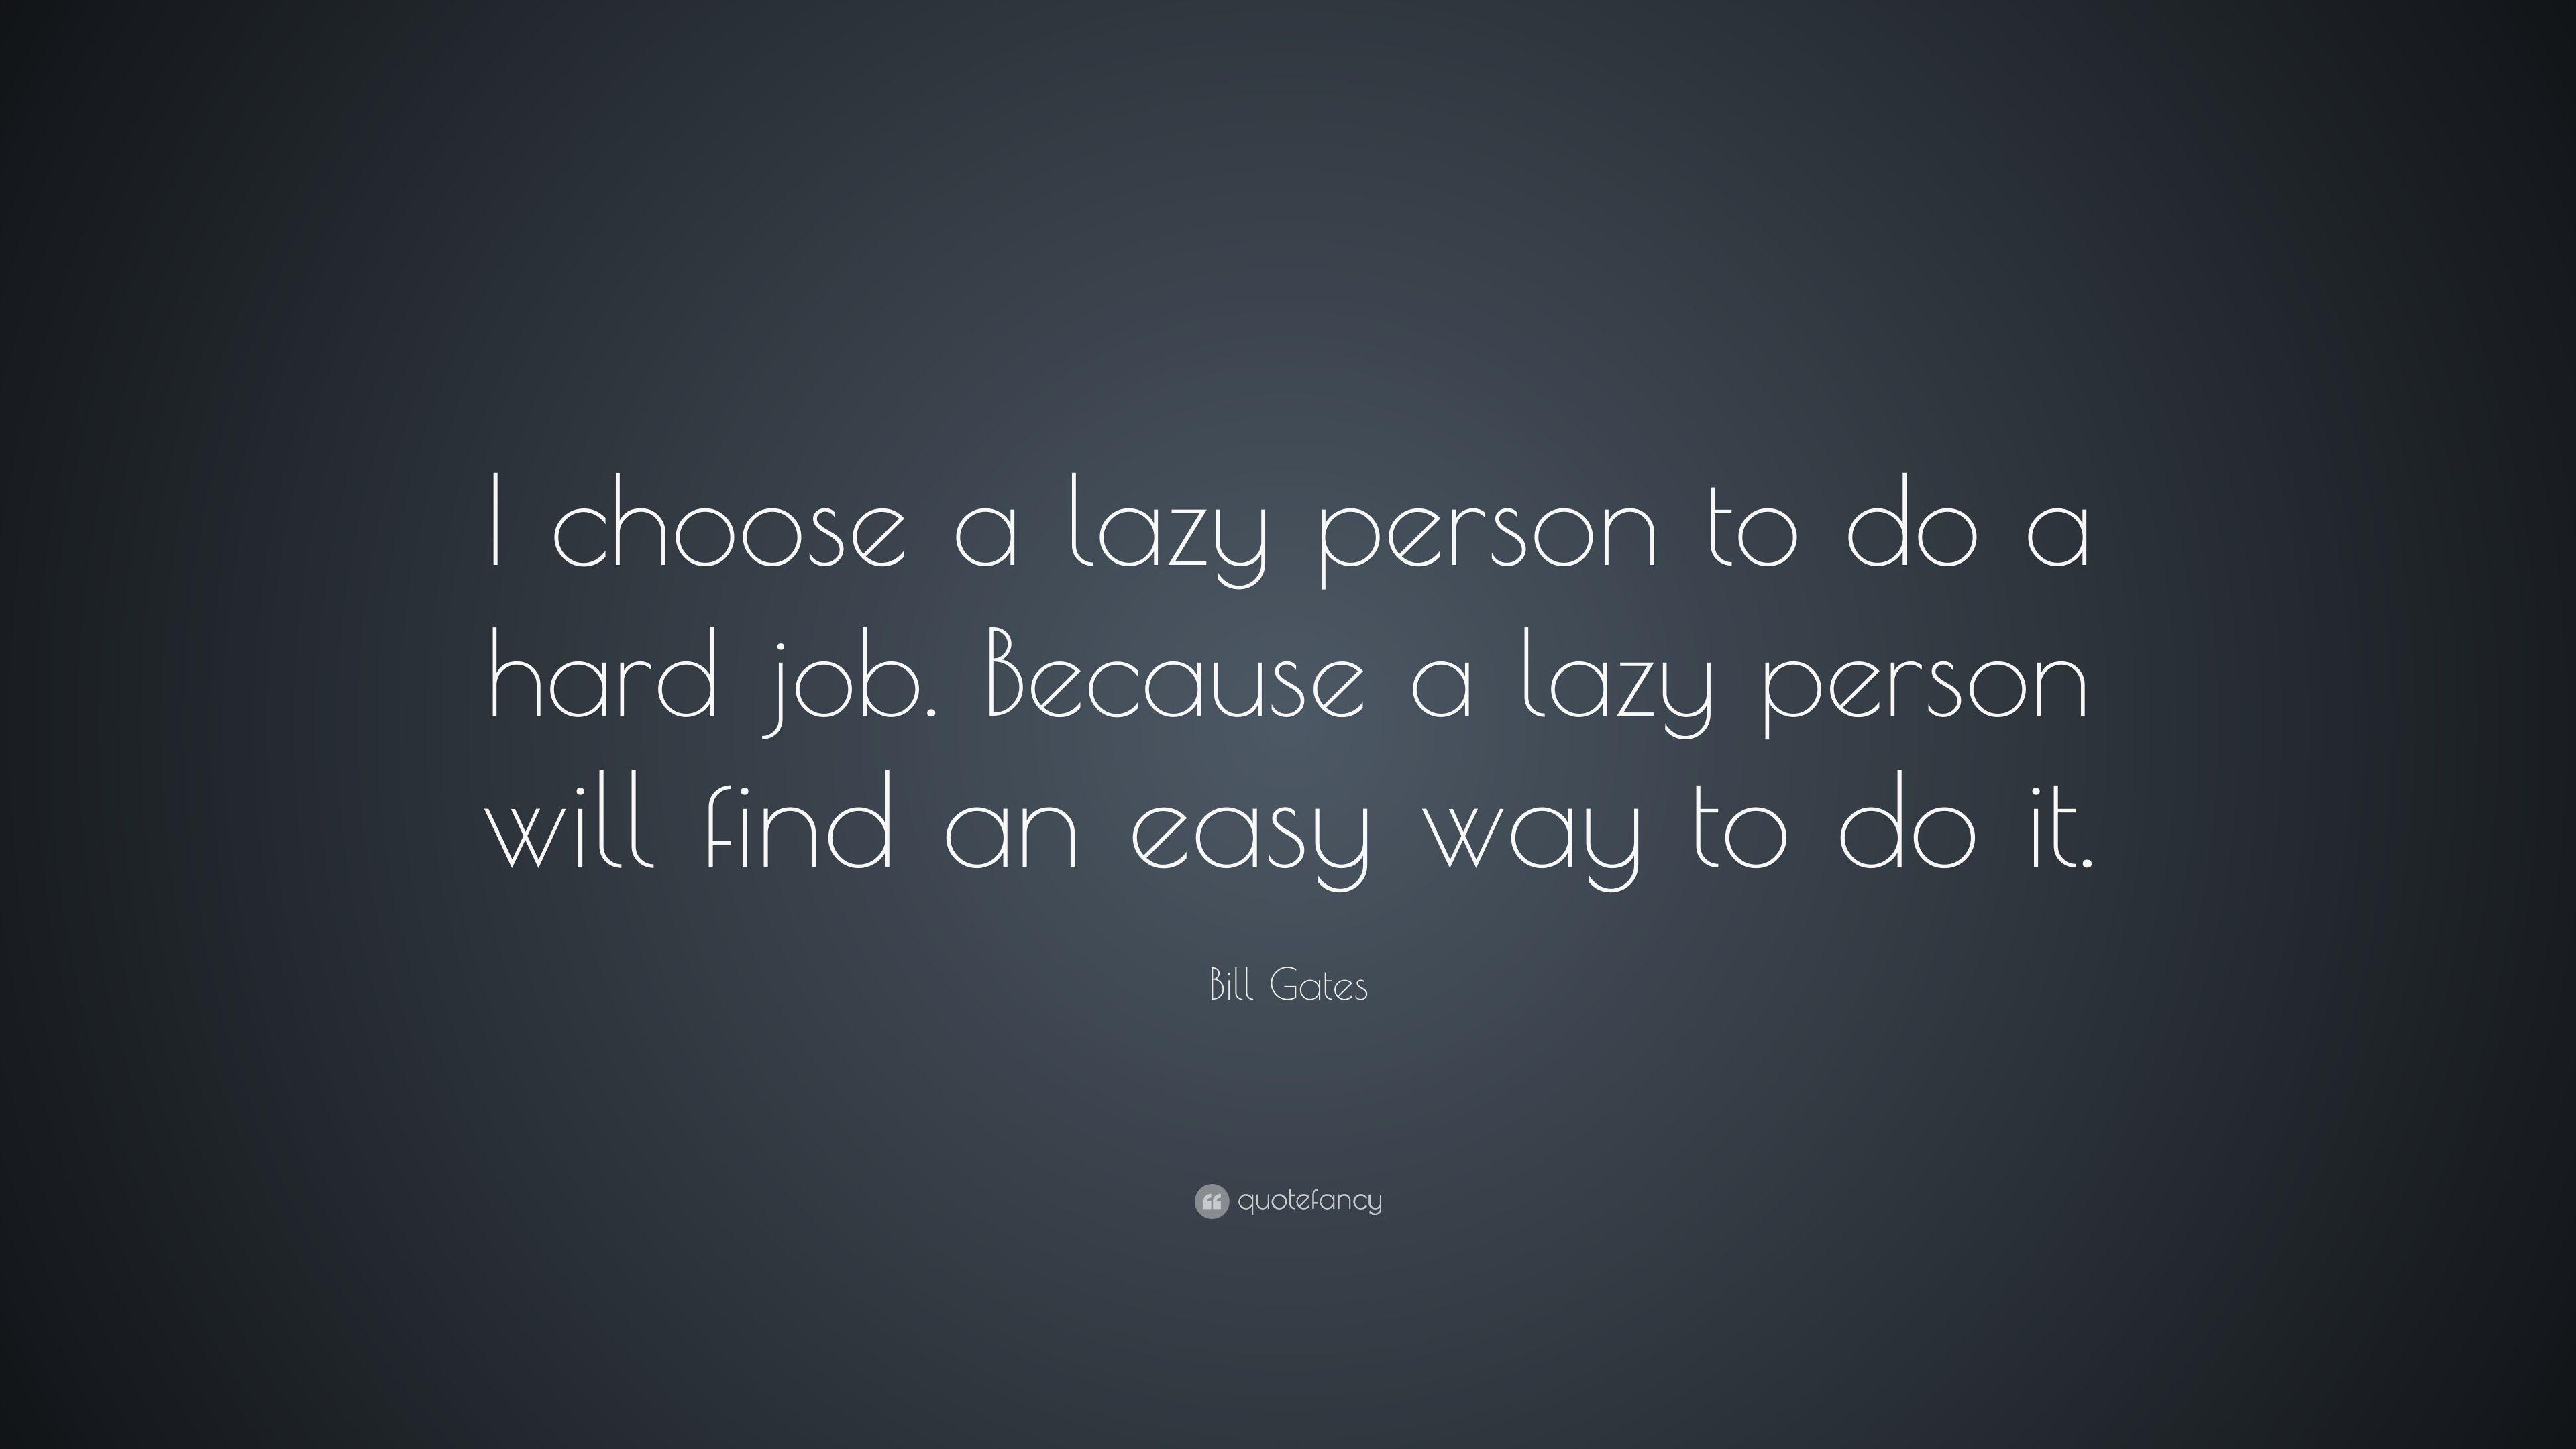 Bill Gates Quote: “I choose a lazy person to do a hard job. Because